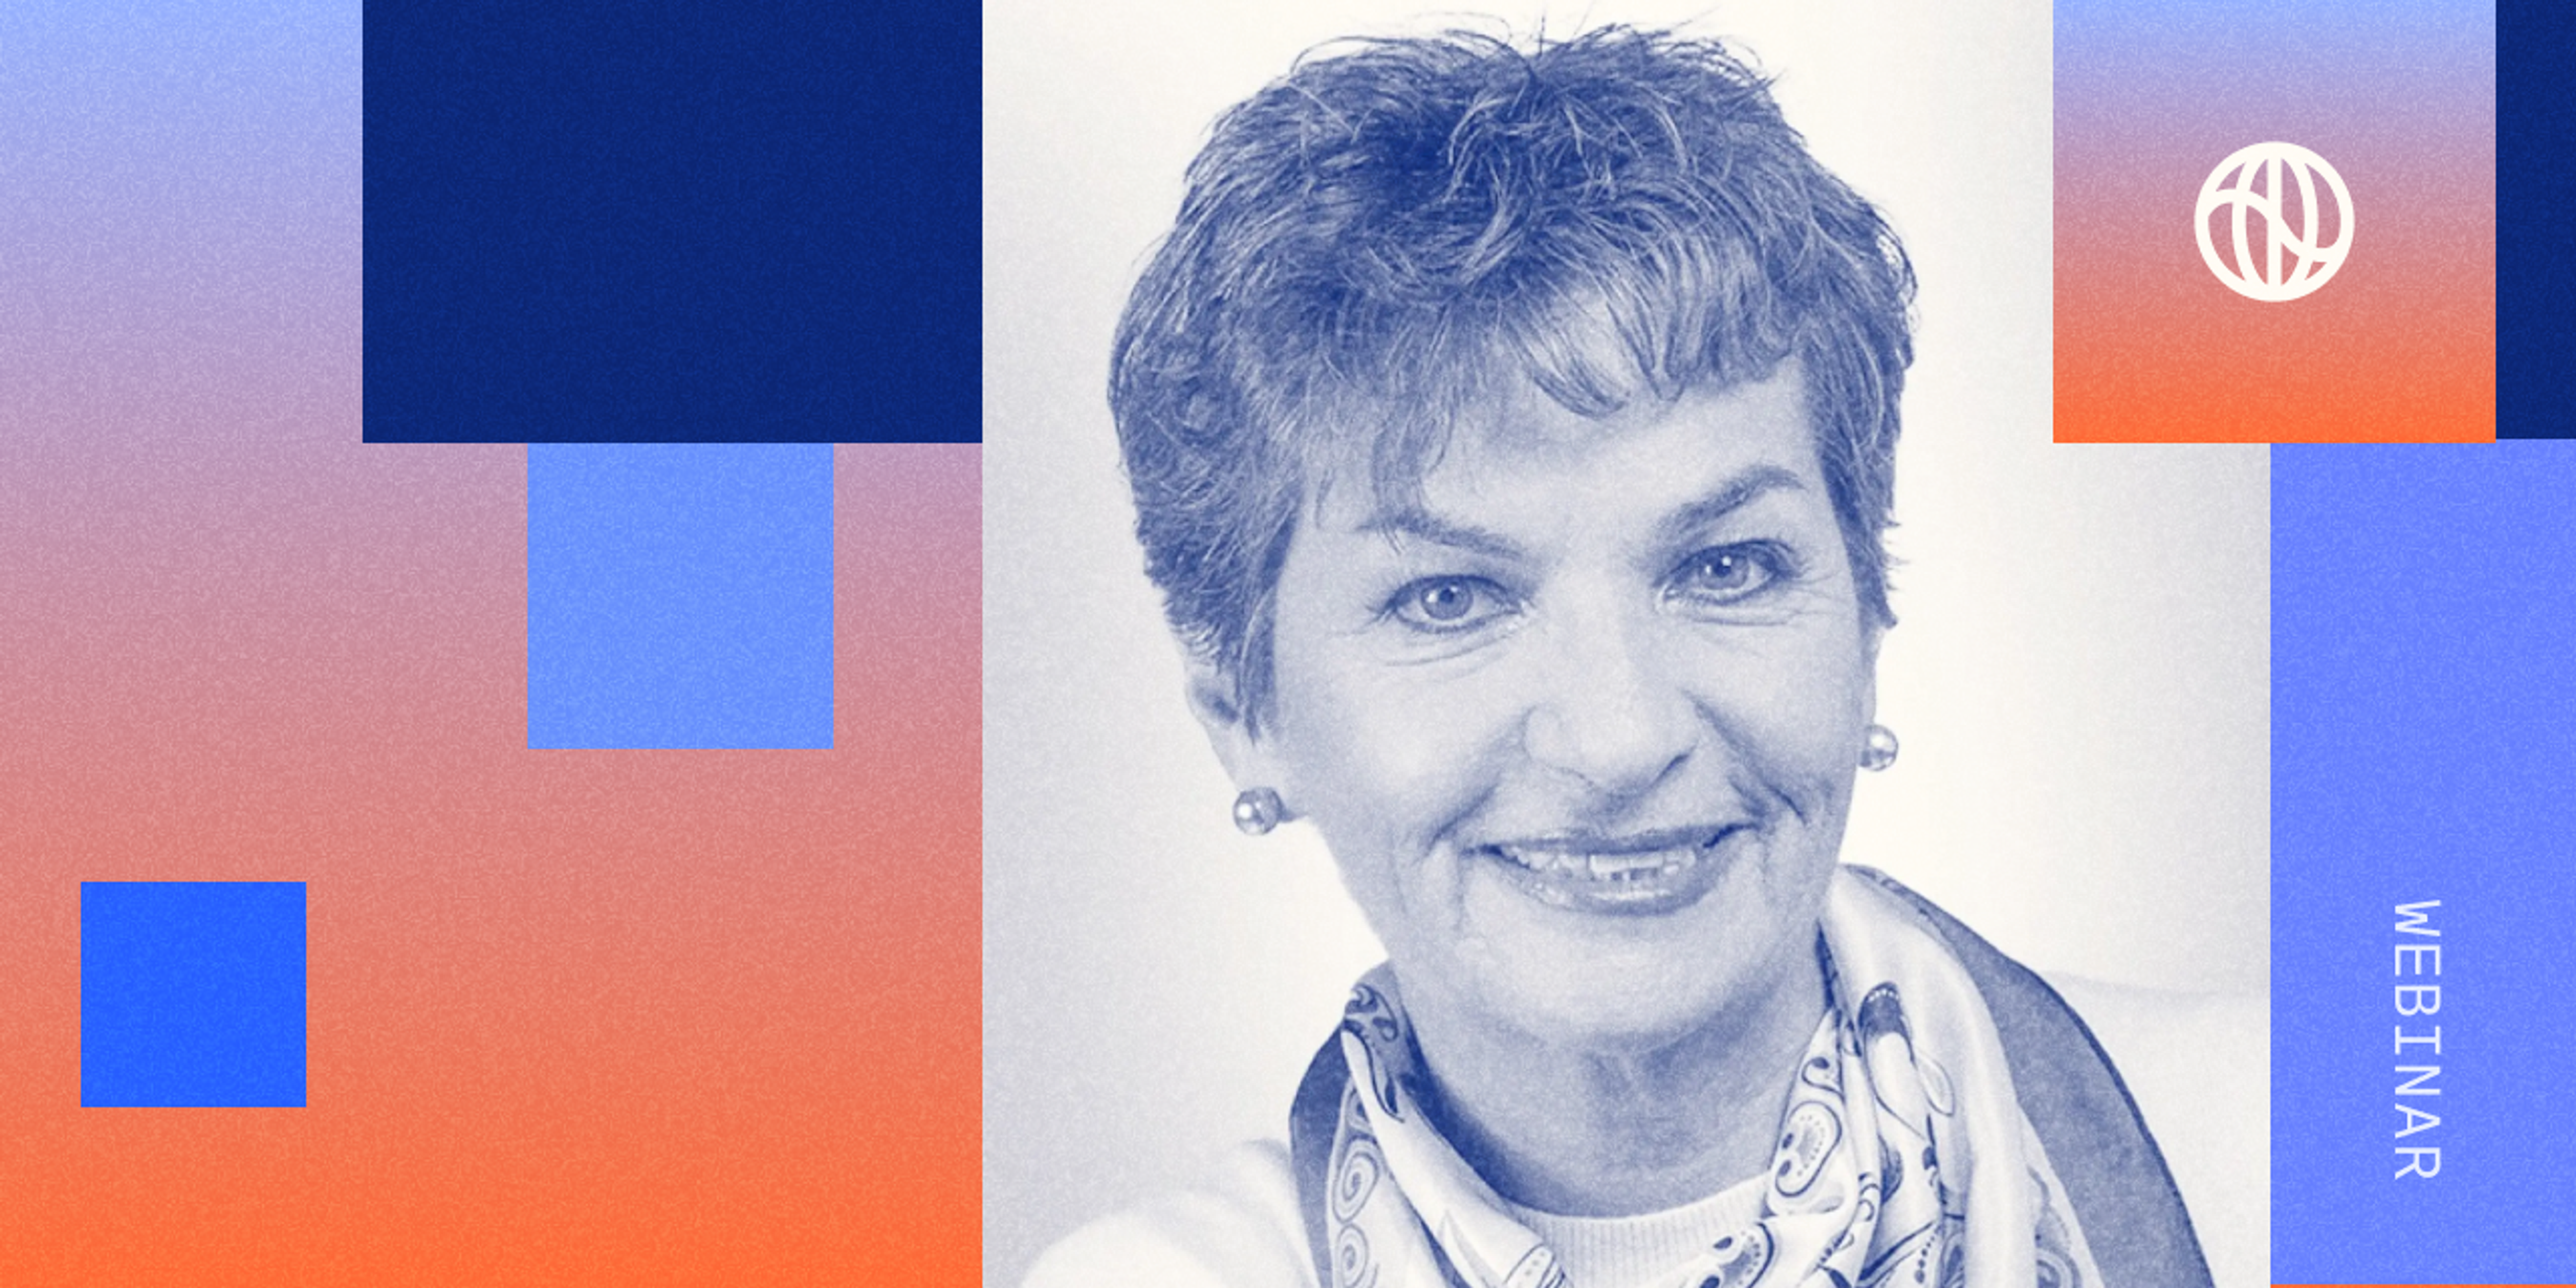 A conversation with Christiana Figueres on climate optimism